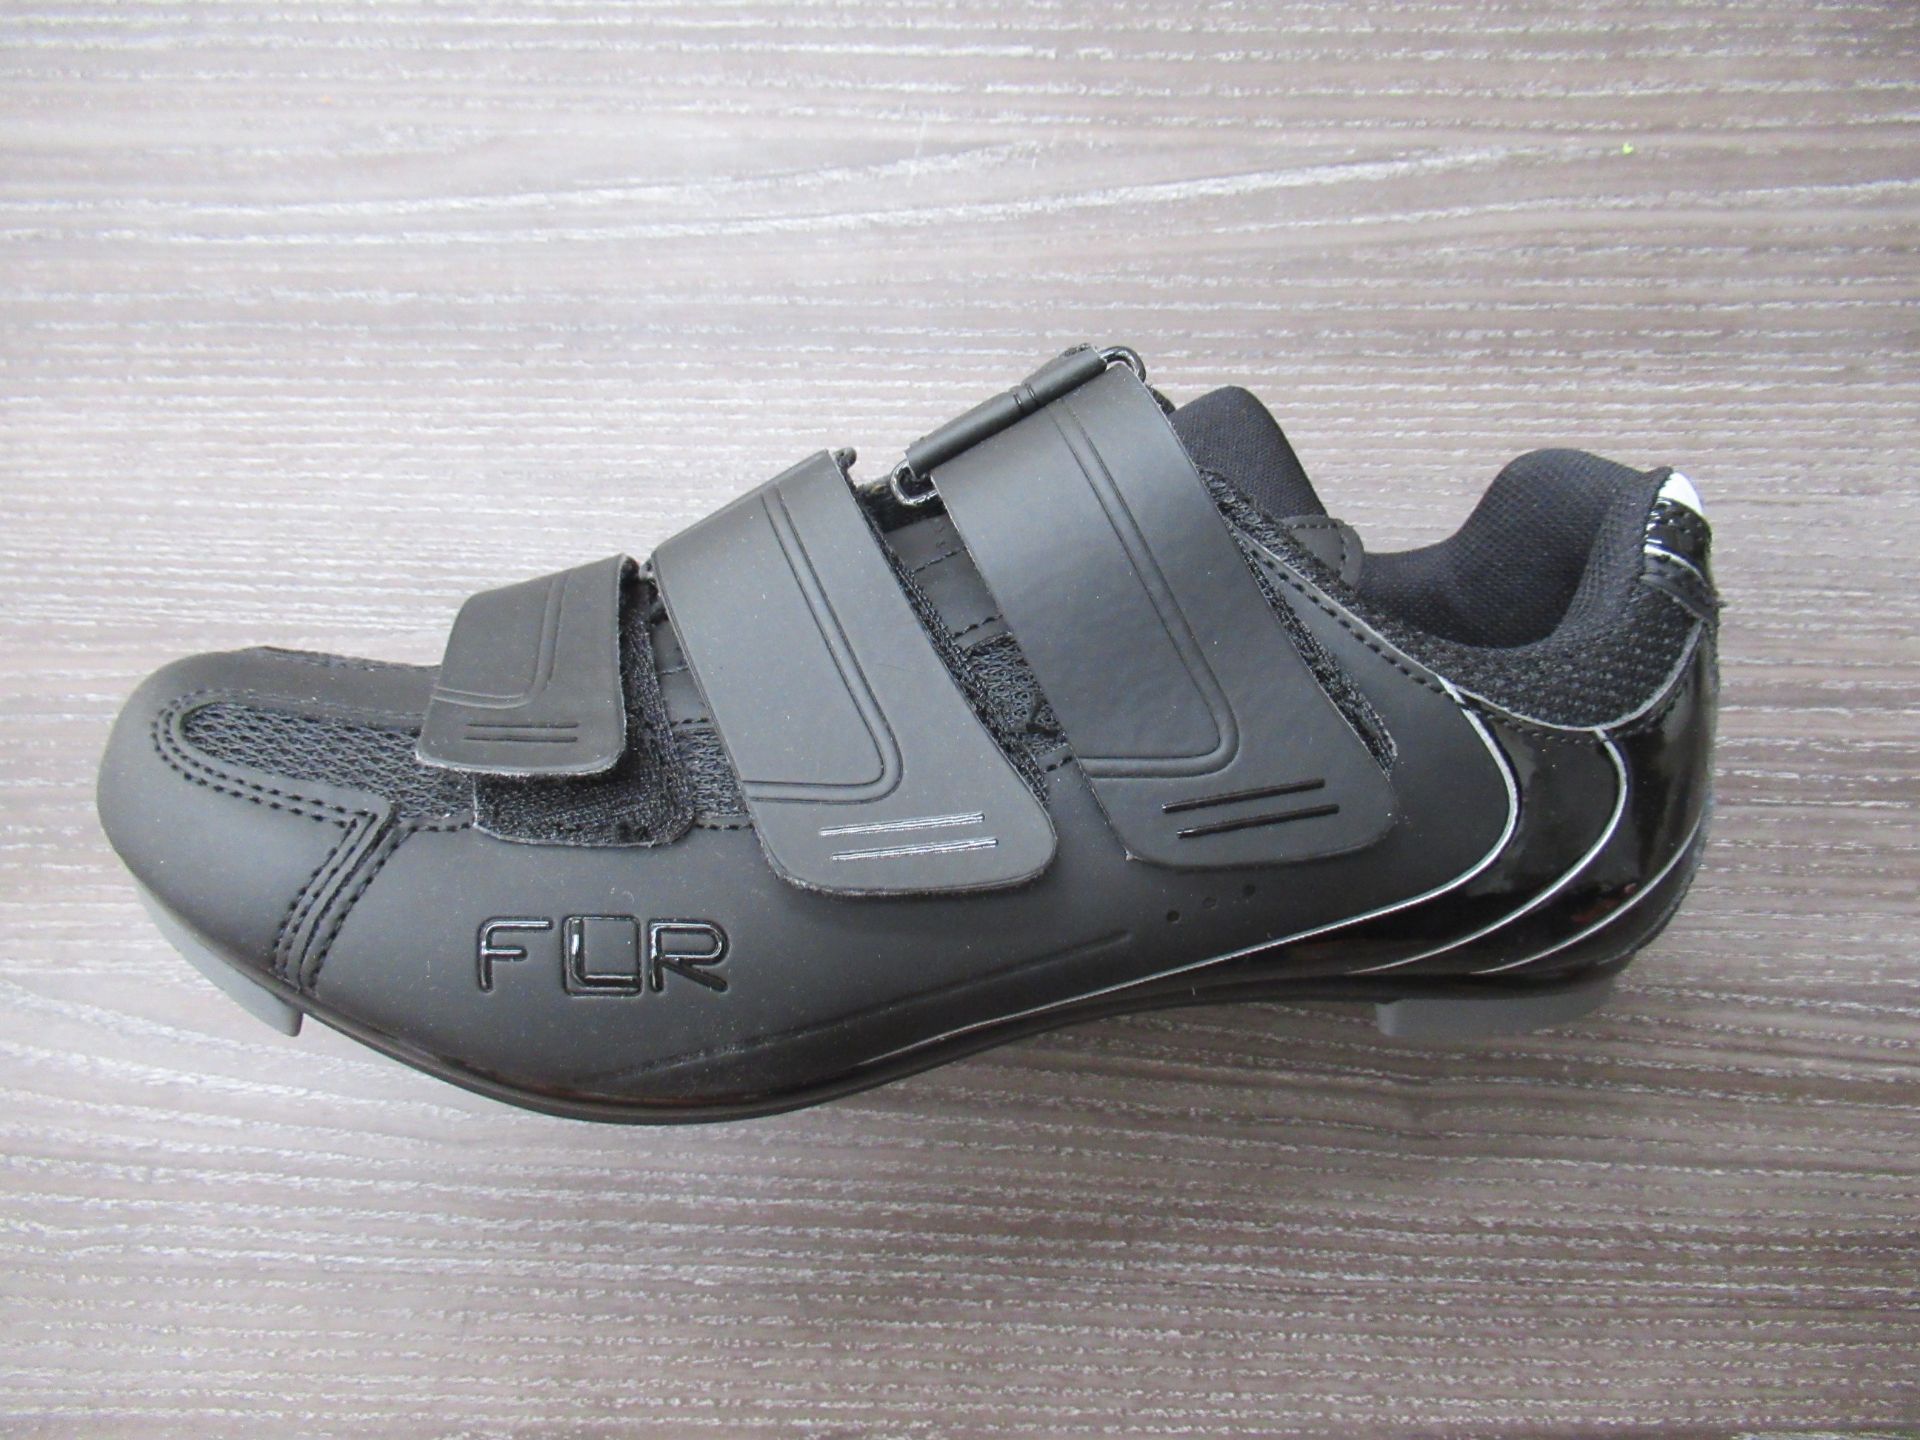 2 x Pairs of FLR cycling shoes - 1 x F-11 boxed EU size 39 (RRP£99.99) and 1 x F-35 III boxed EU siz - Image 4 of 7